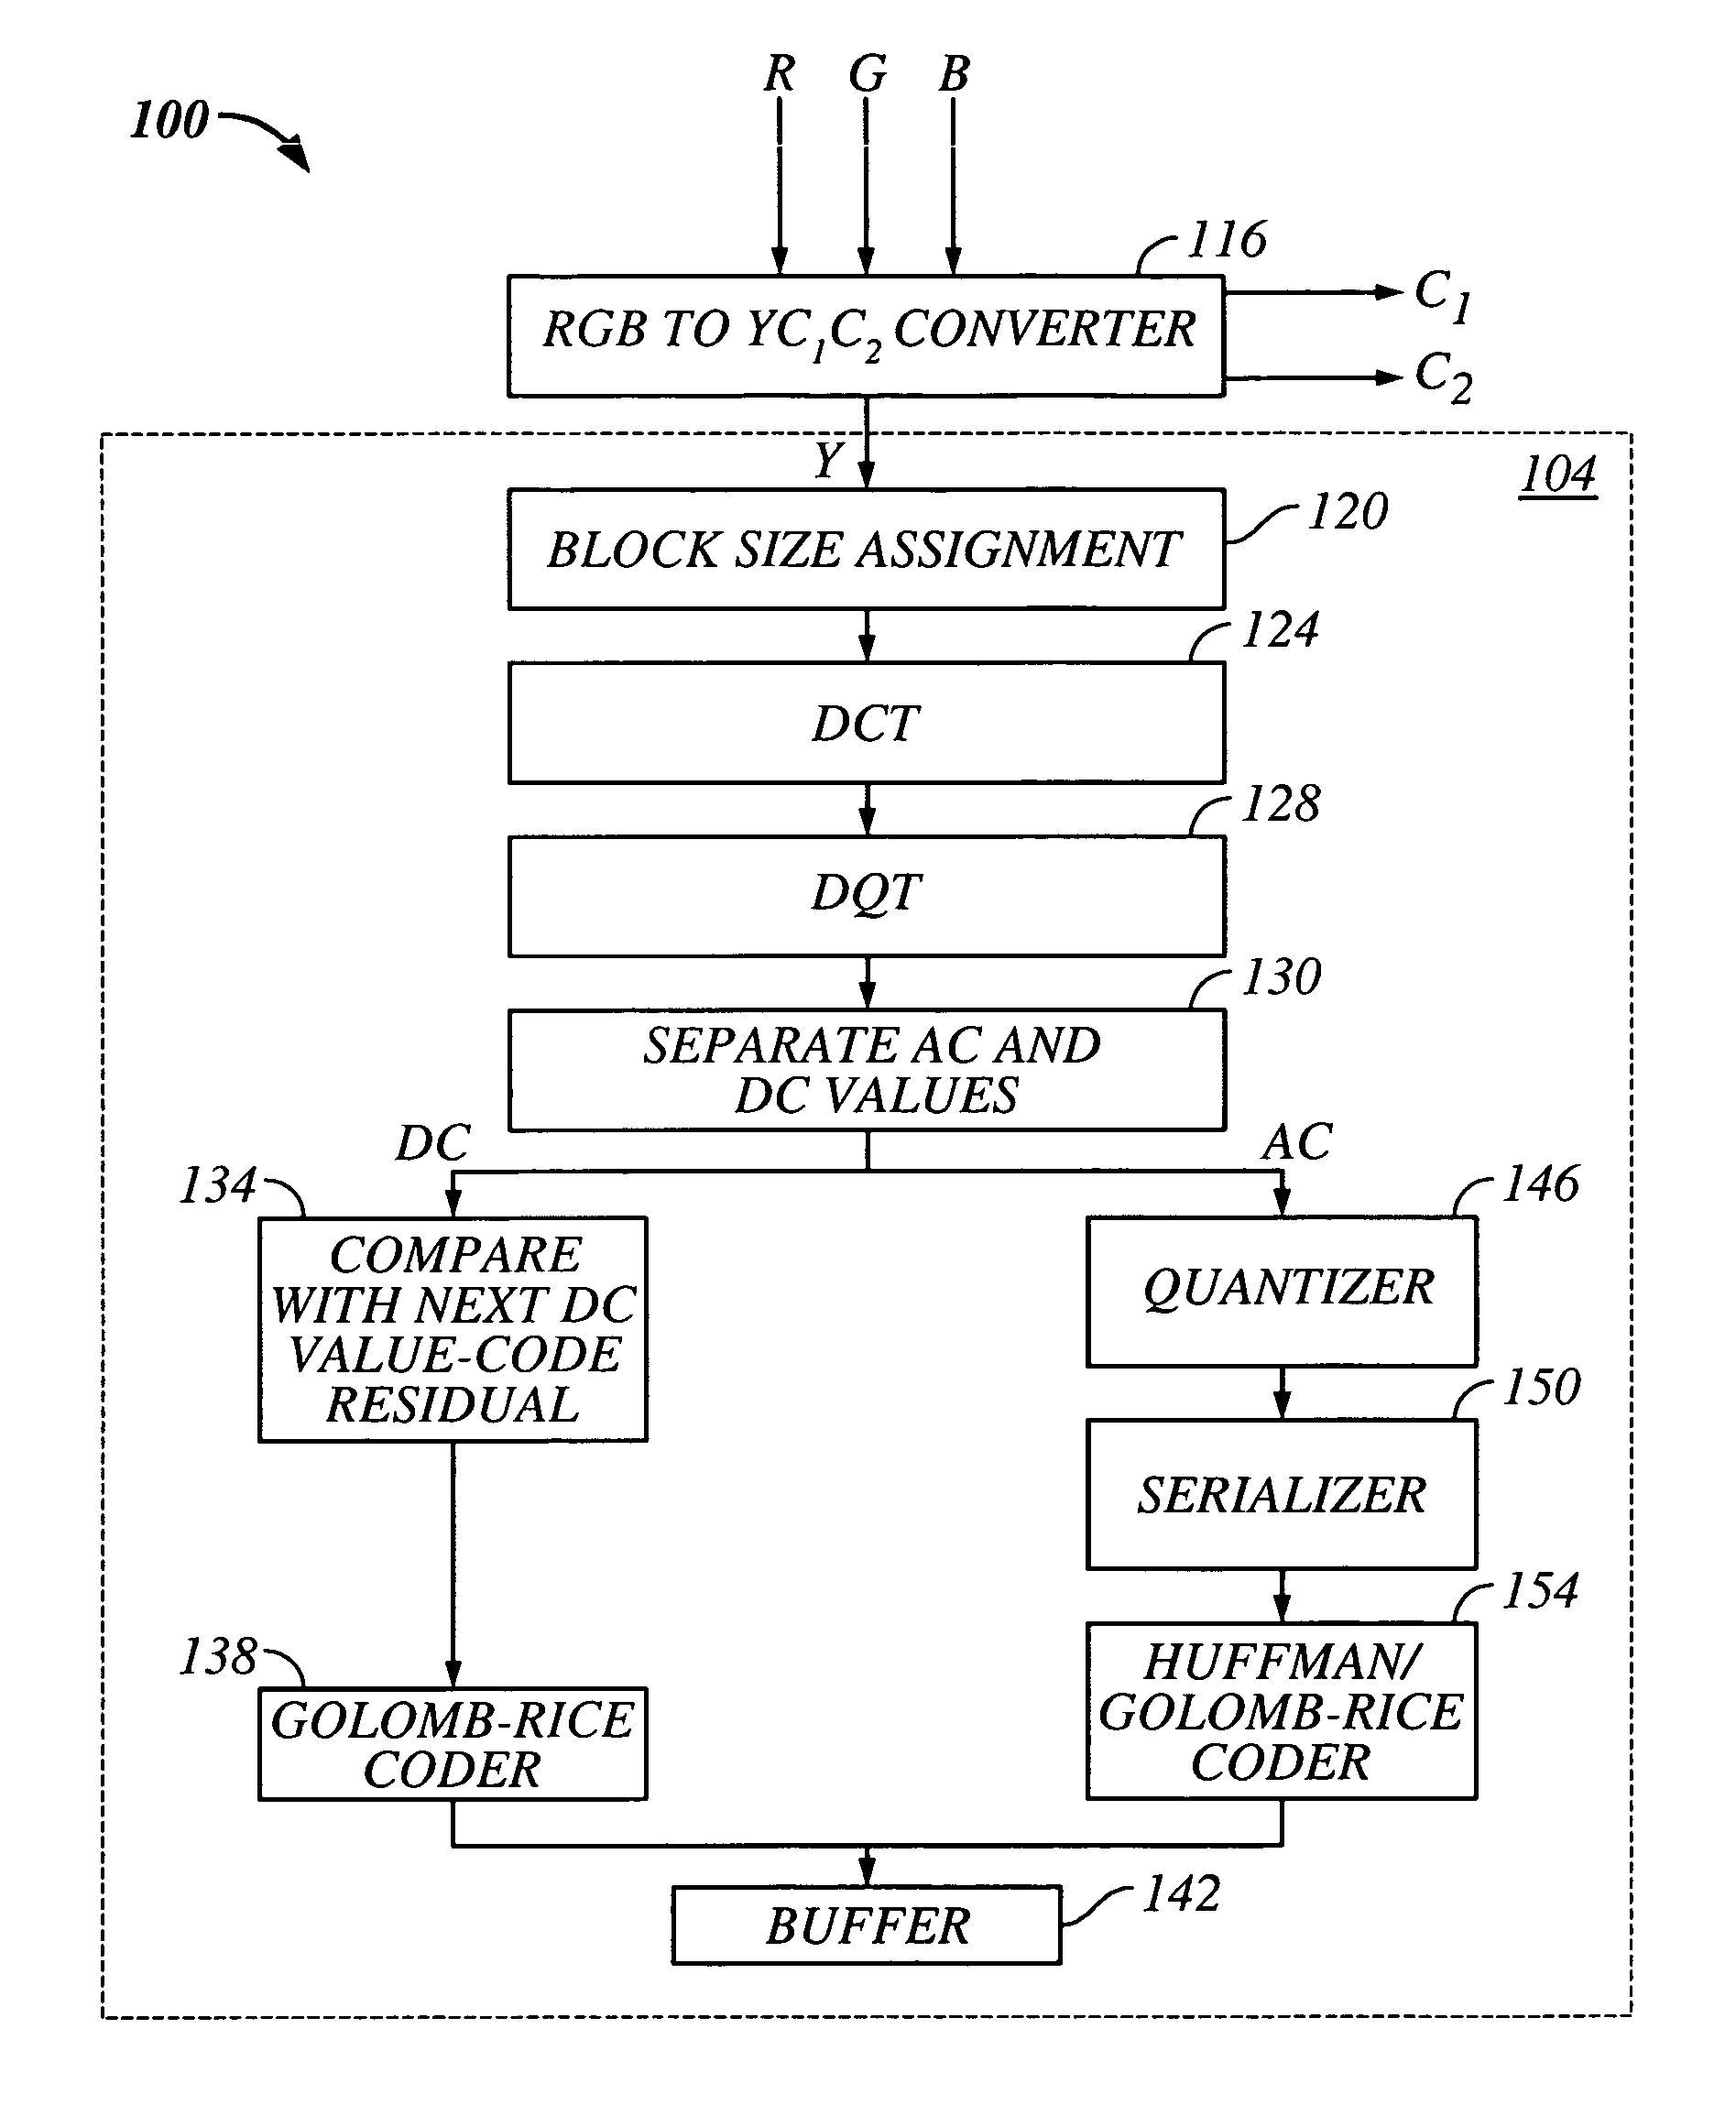 Apparatus and method for encoding digital image data in a lossless manner